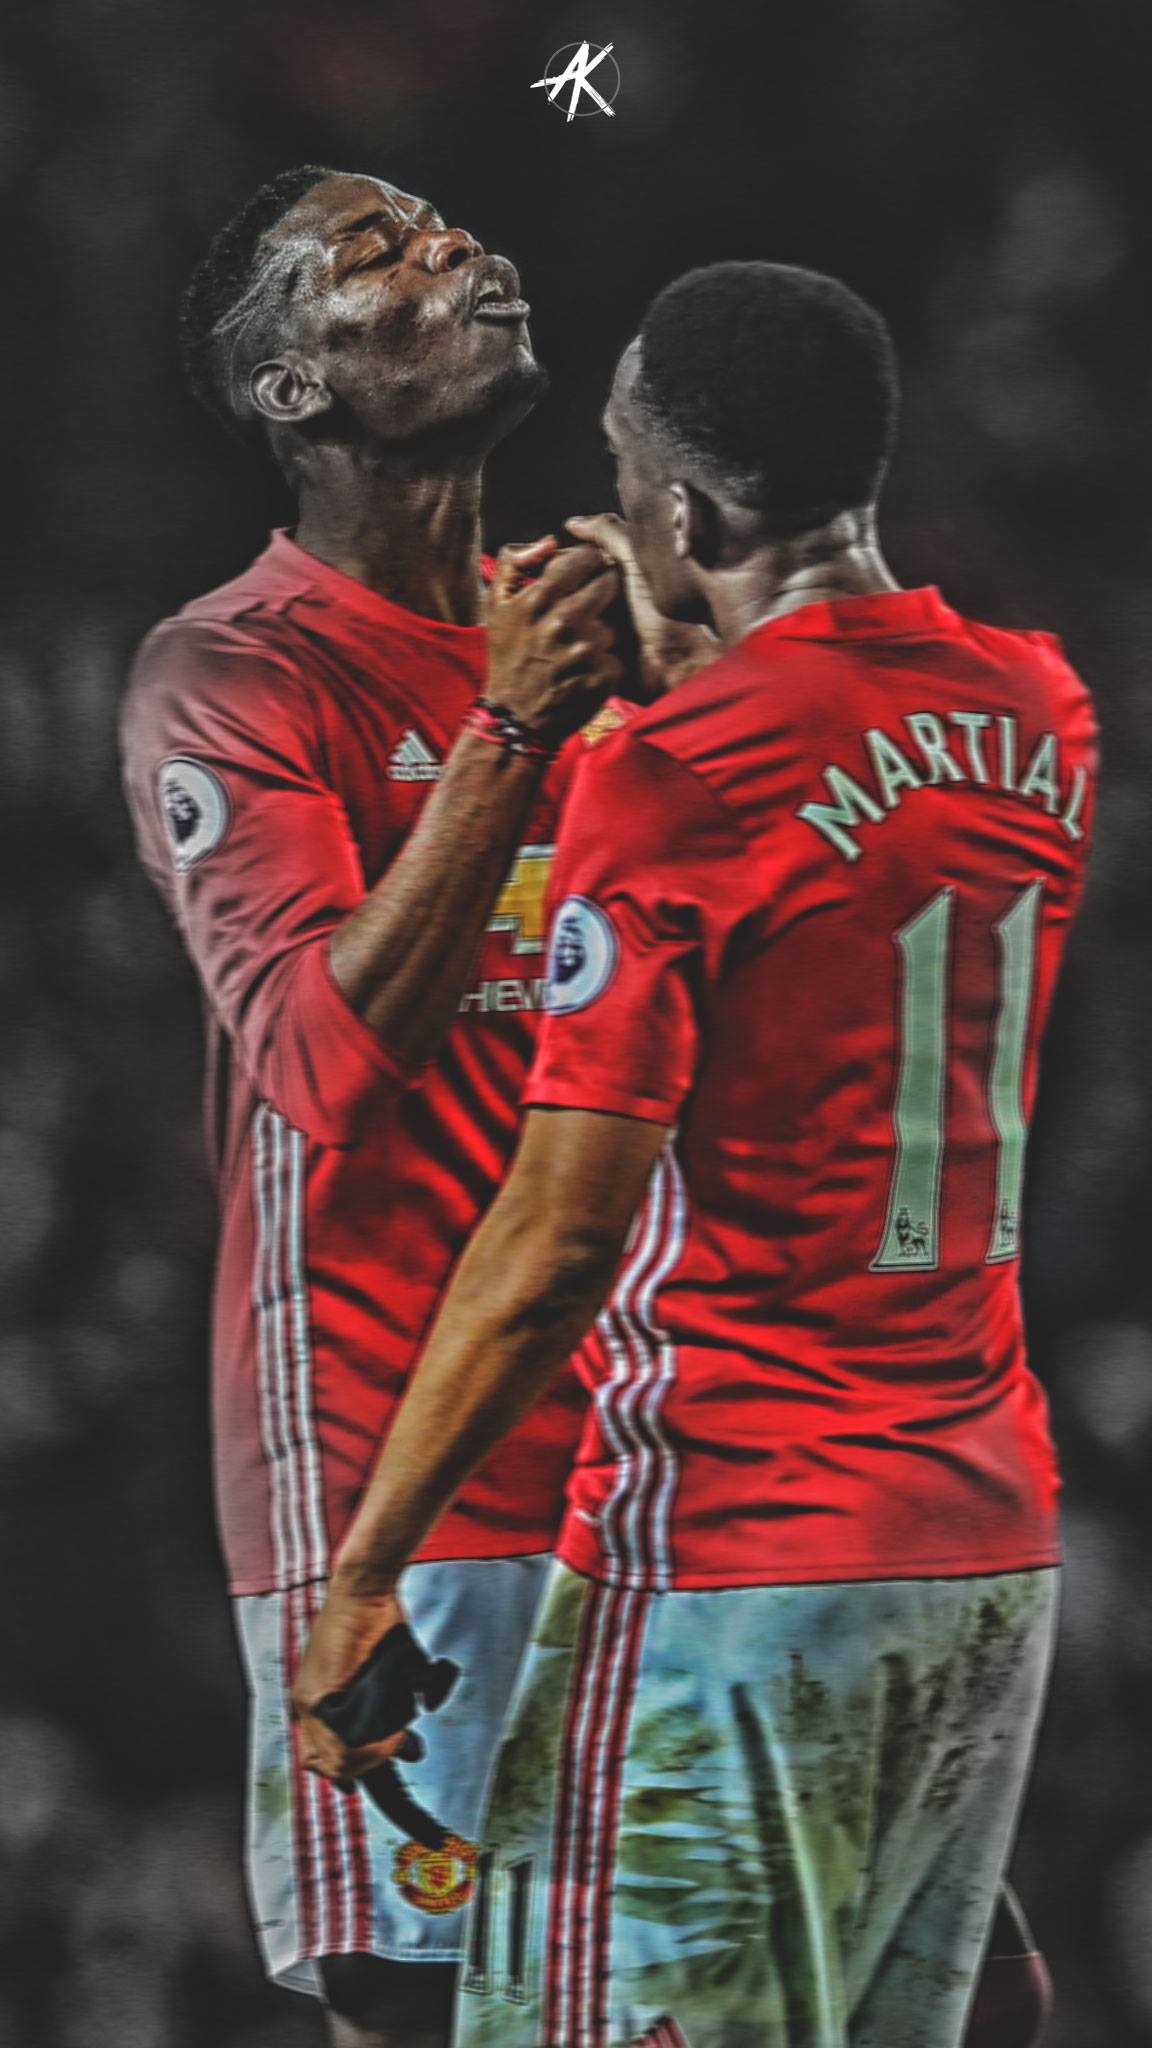 Anthony Martial 2021 Wallpapers